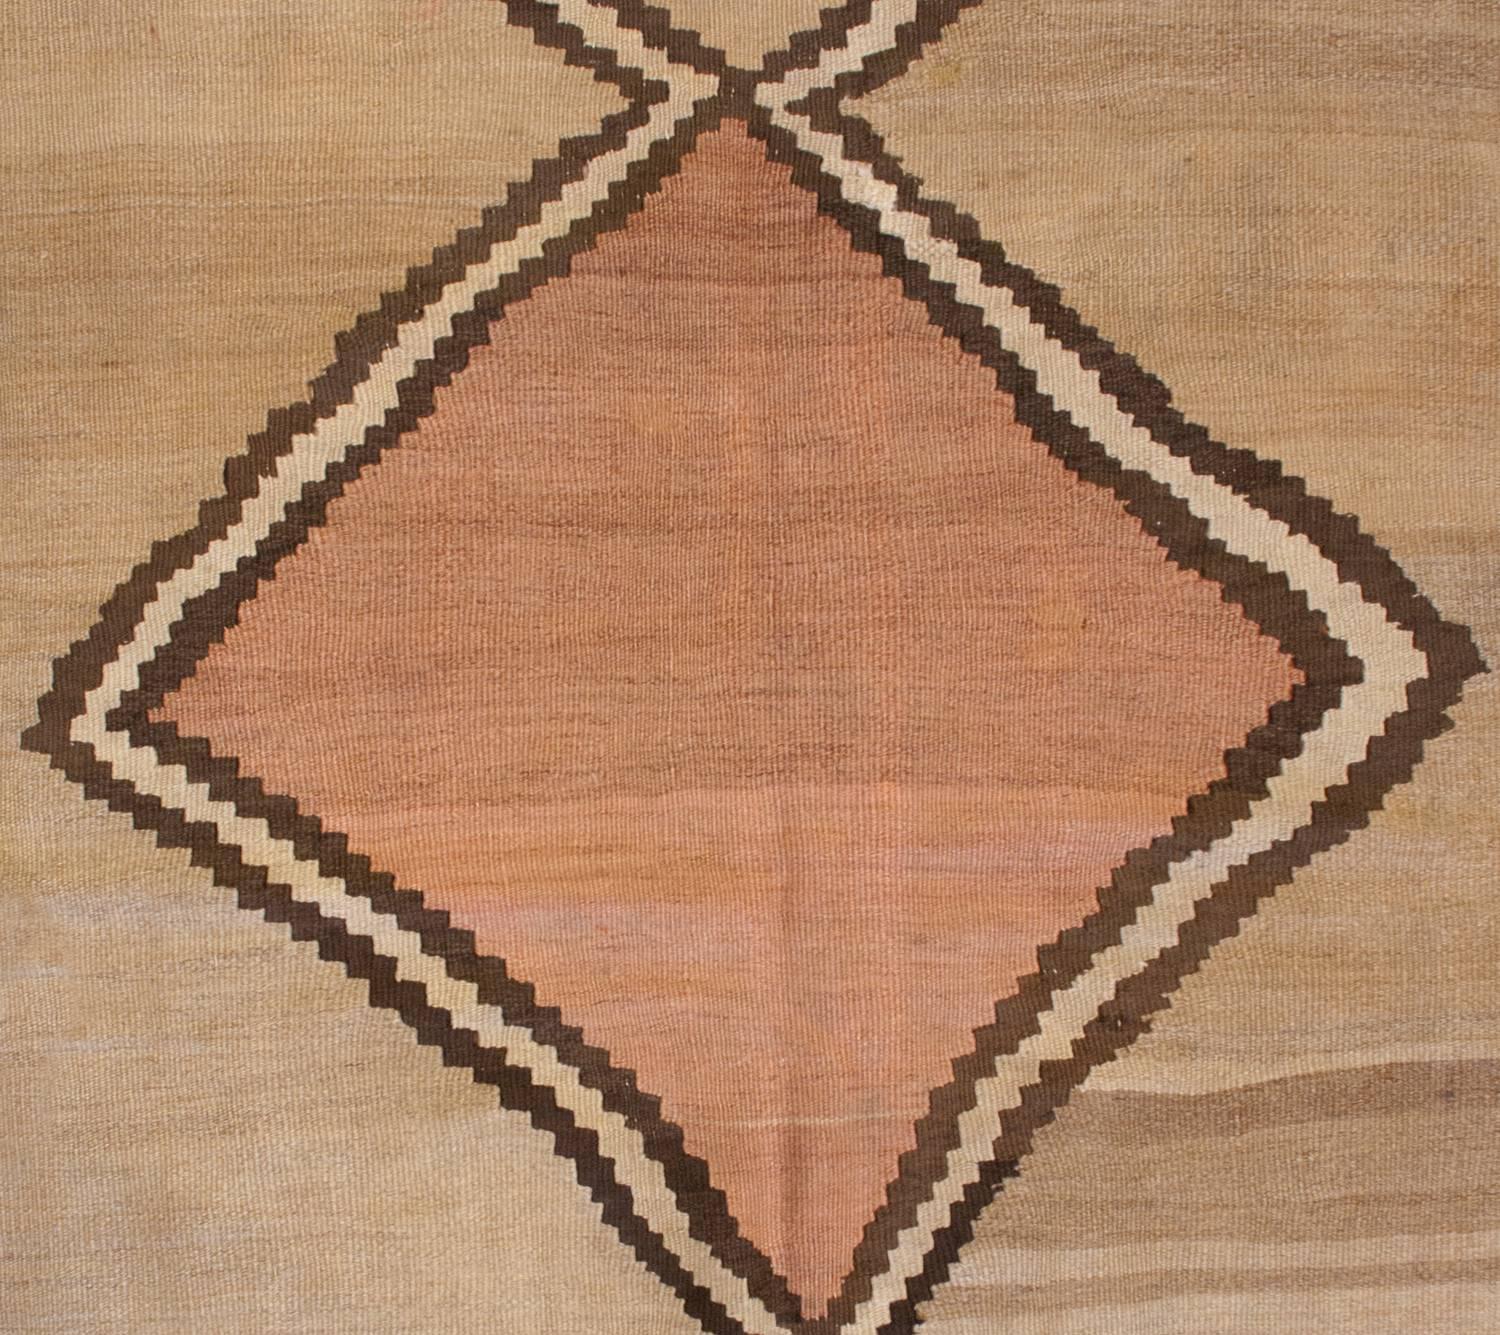 An early 20th century Persian Shahsavan Kilim rug with an incredible large-scale zig-zag pattern that runs down the center. A large pale red diamond is centrally positioned. The rest of the rug is woven in natural, undyed, wool. The border is